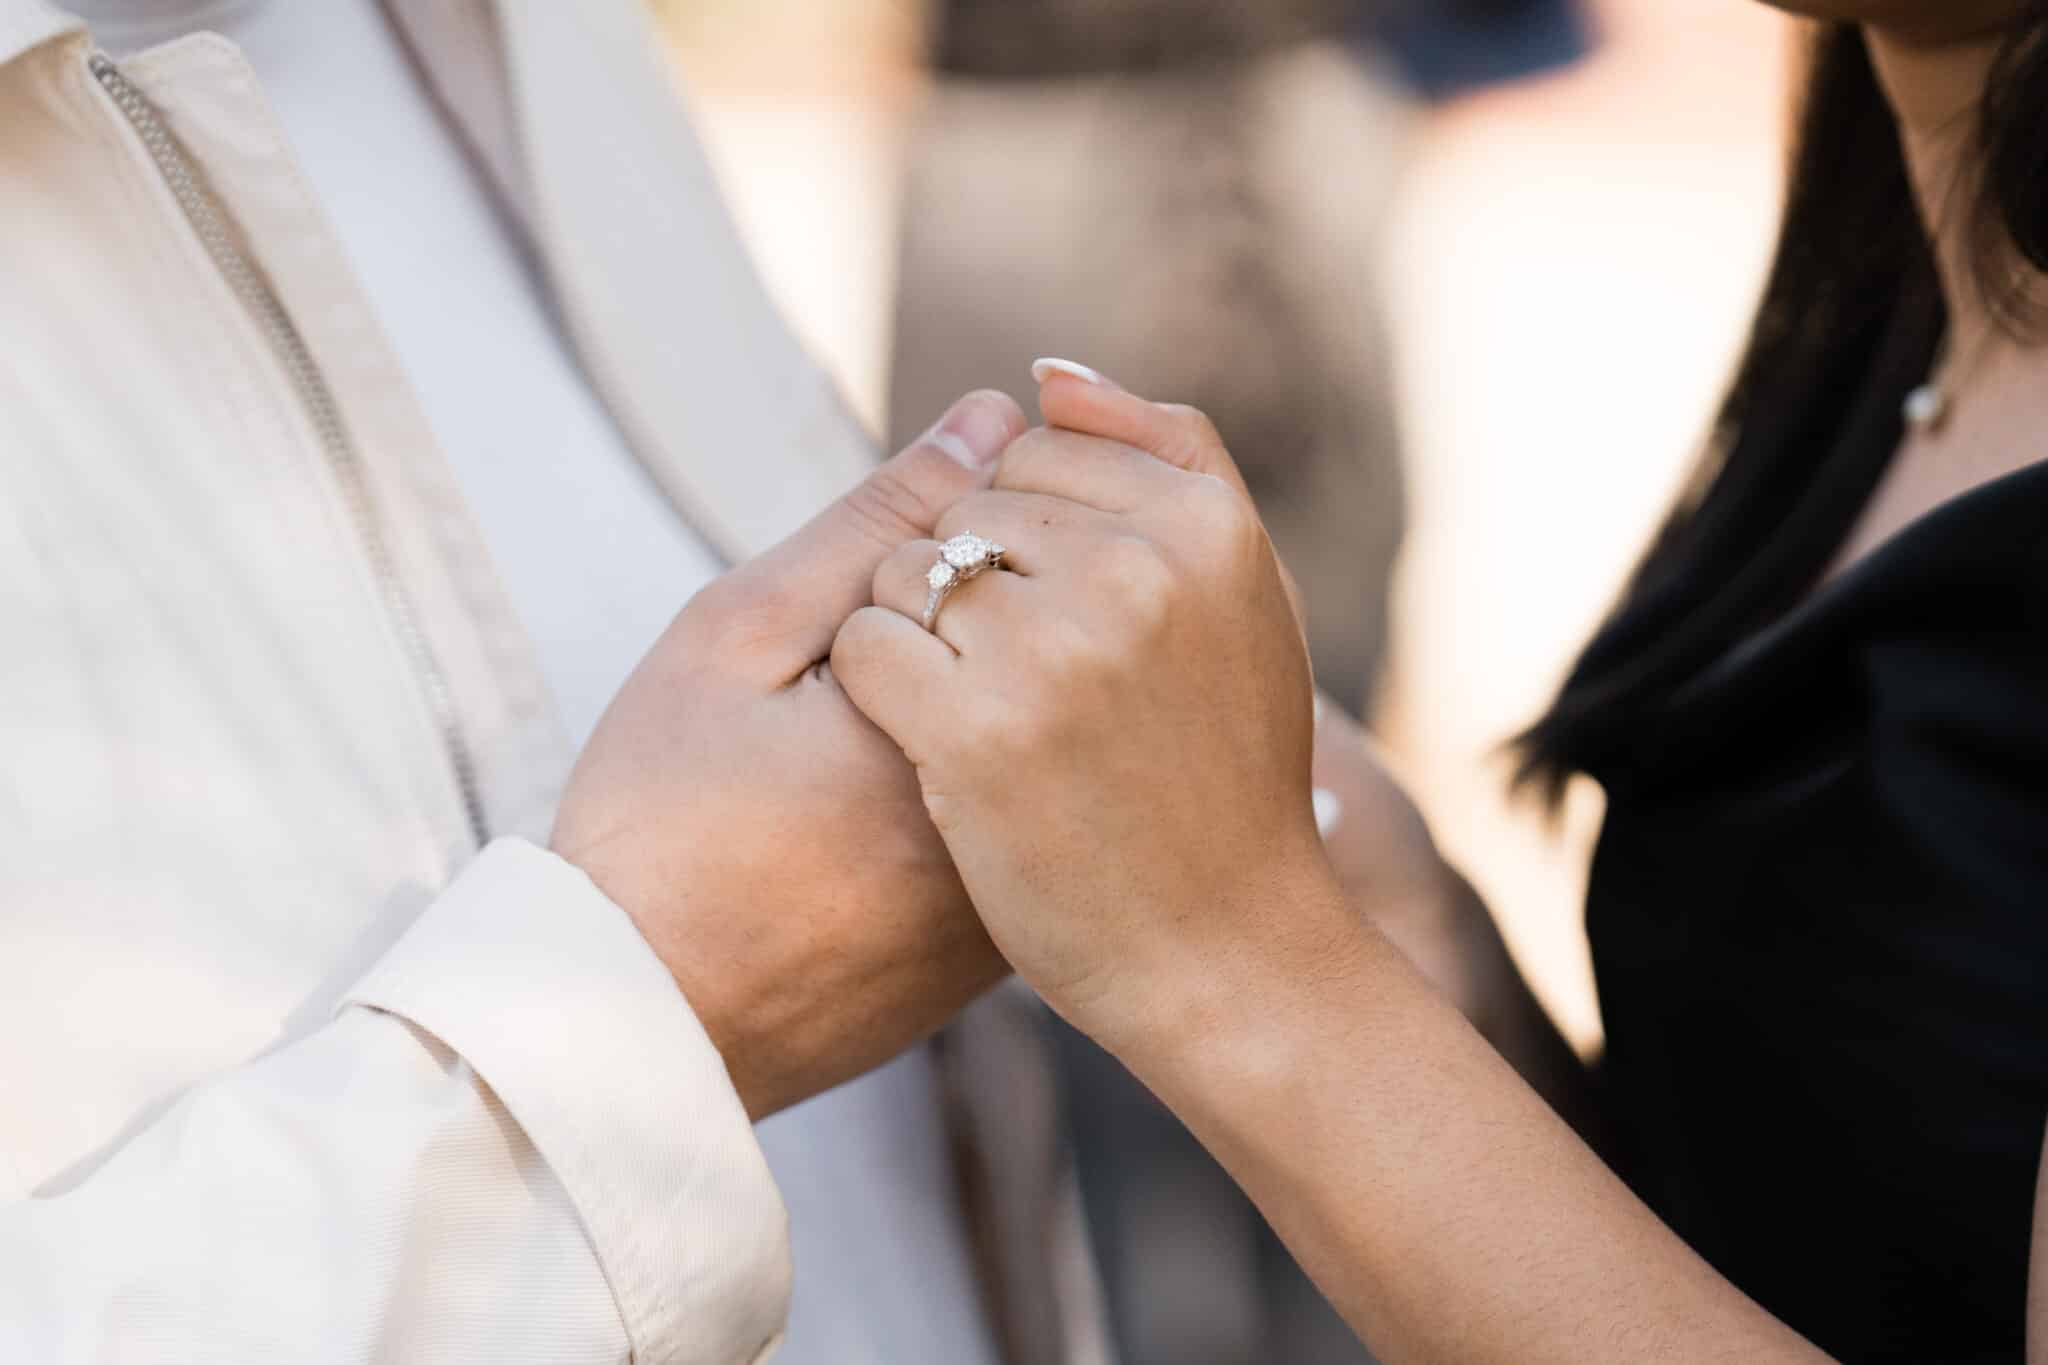 close up image of a couple holding hands and engagement ring predominantly showing